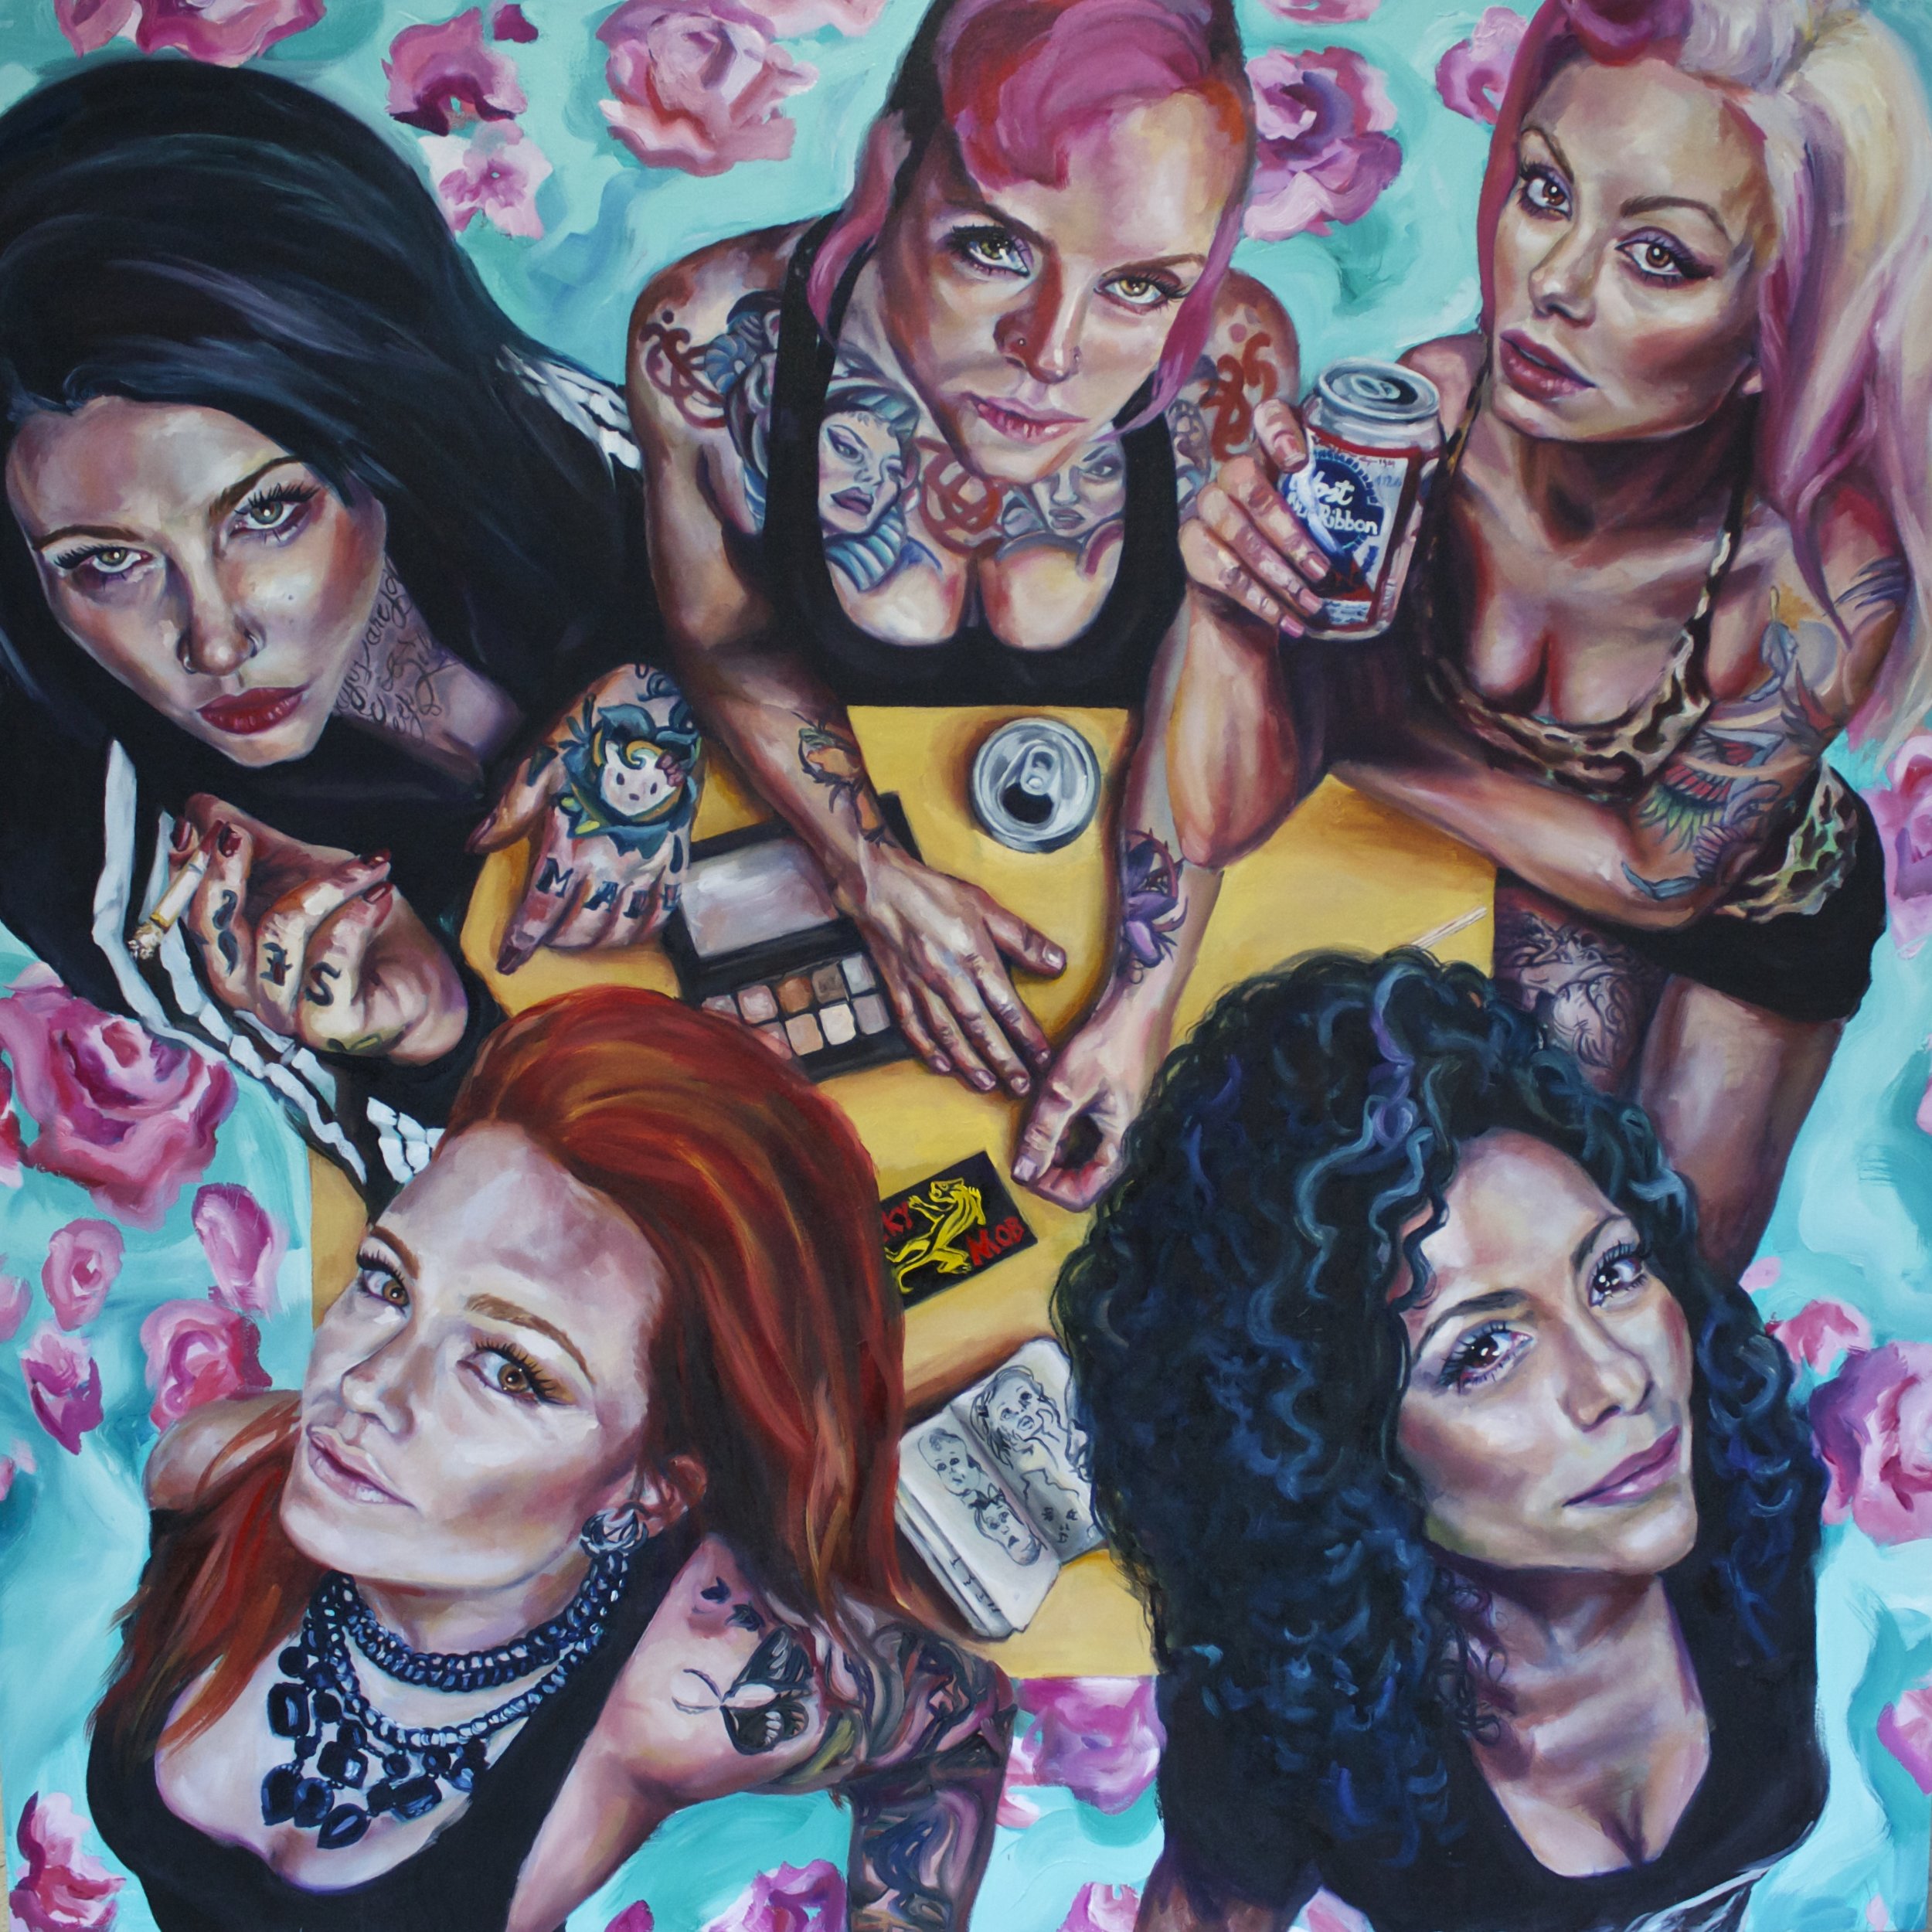  No crying at the afterparty   65x65” oil on canvas  